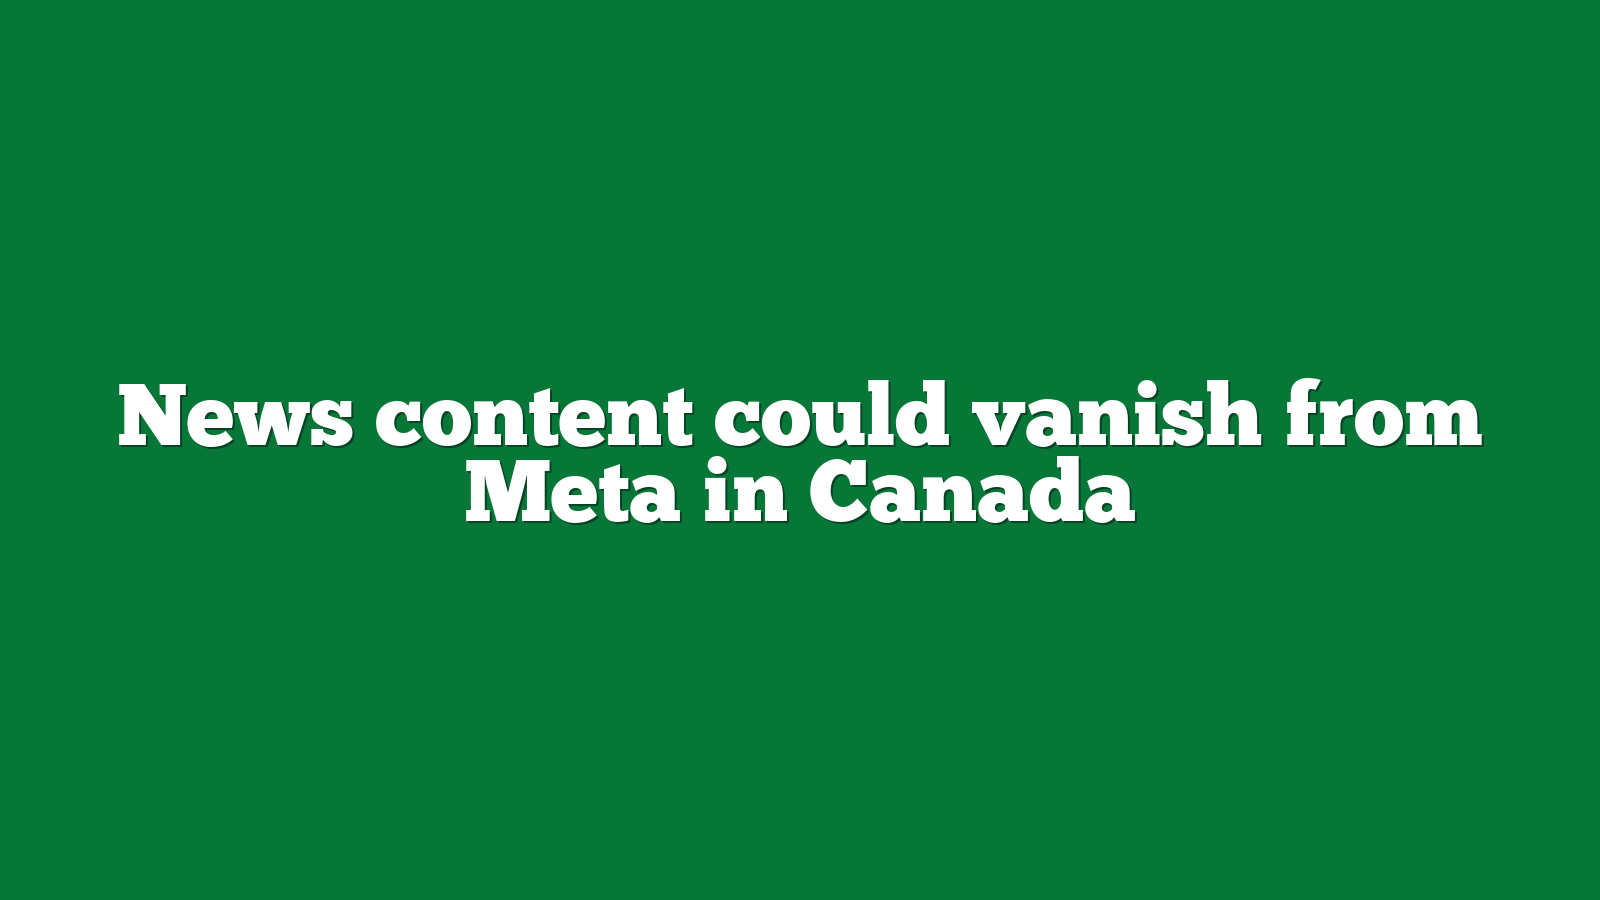 News content could vanish from Meta in Canada